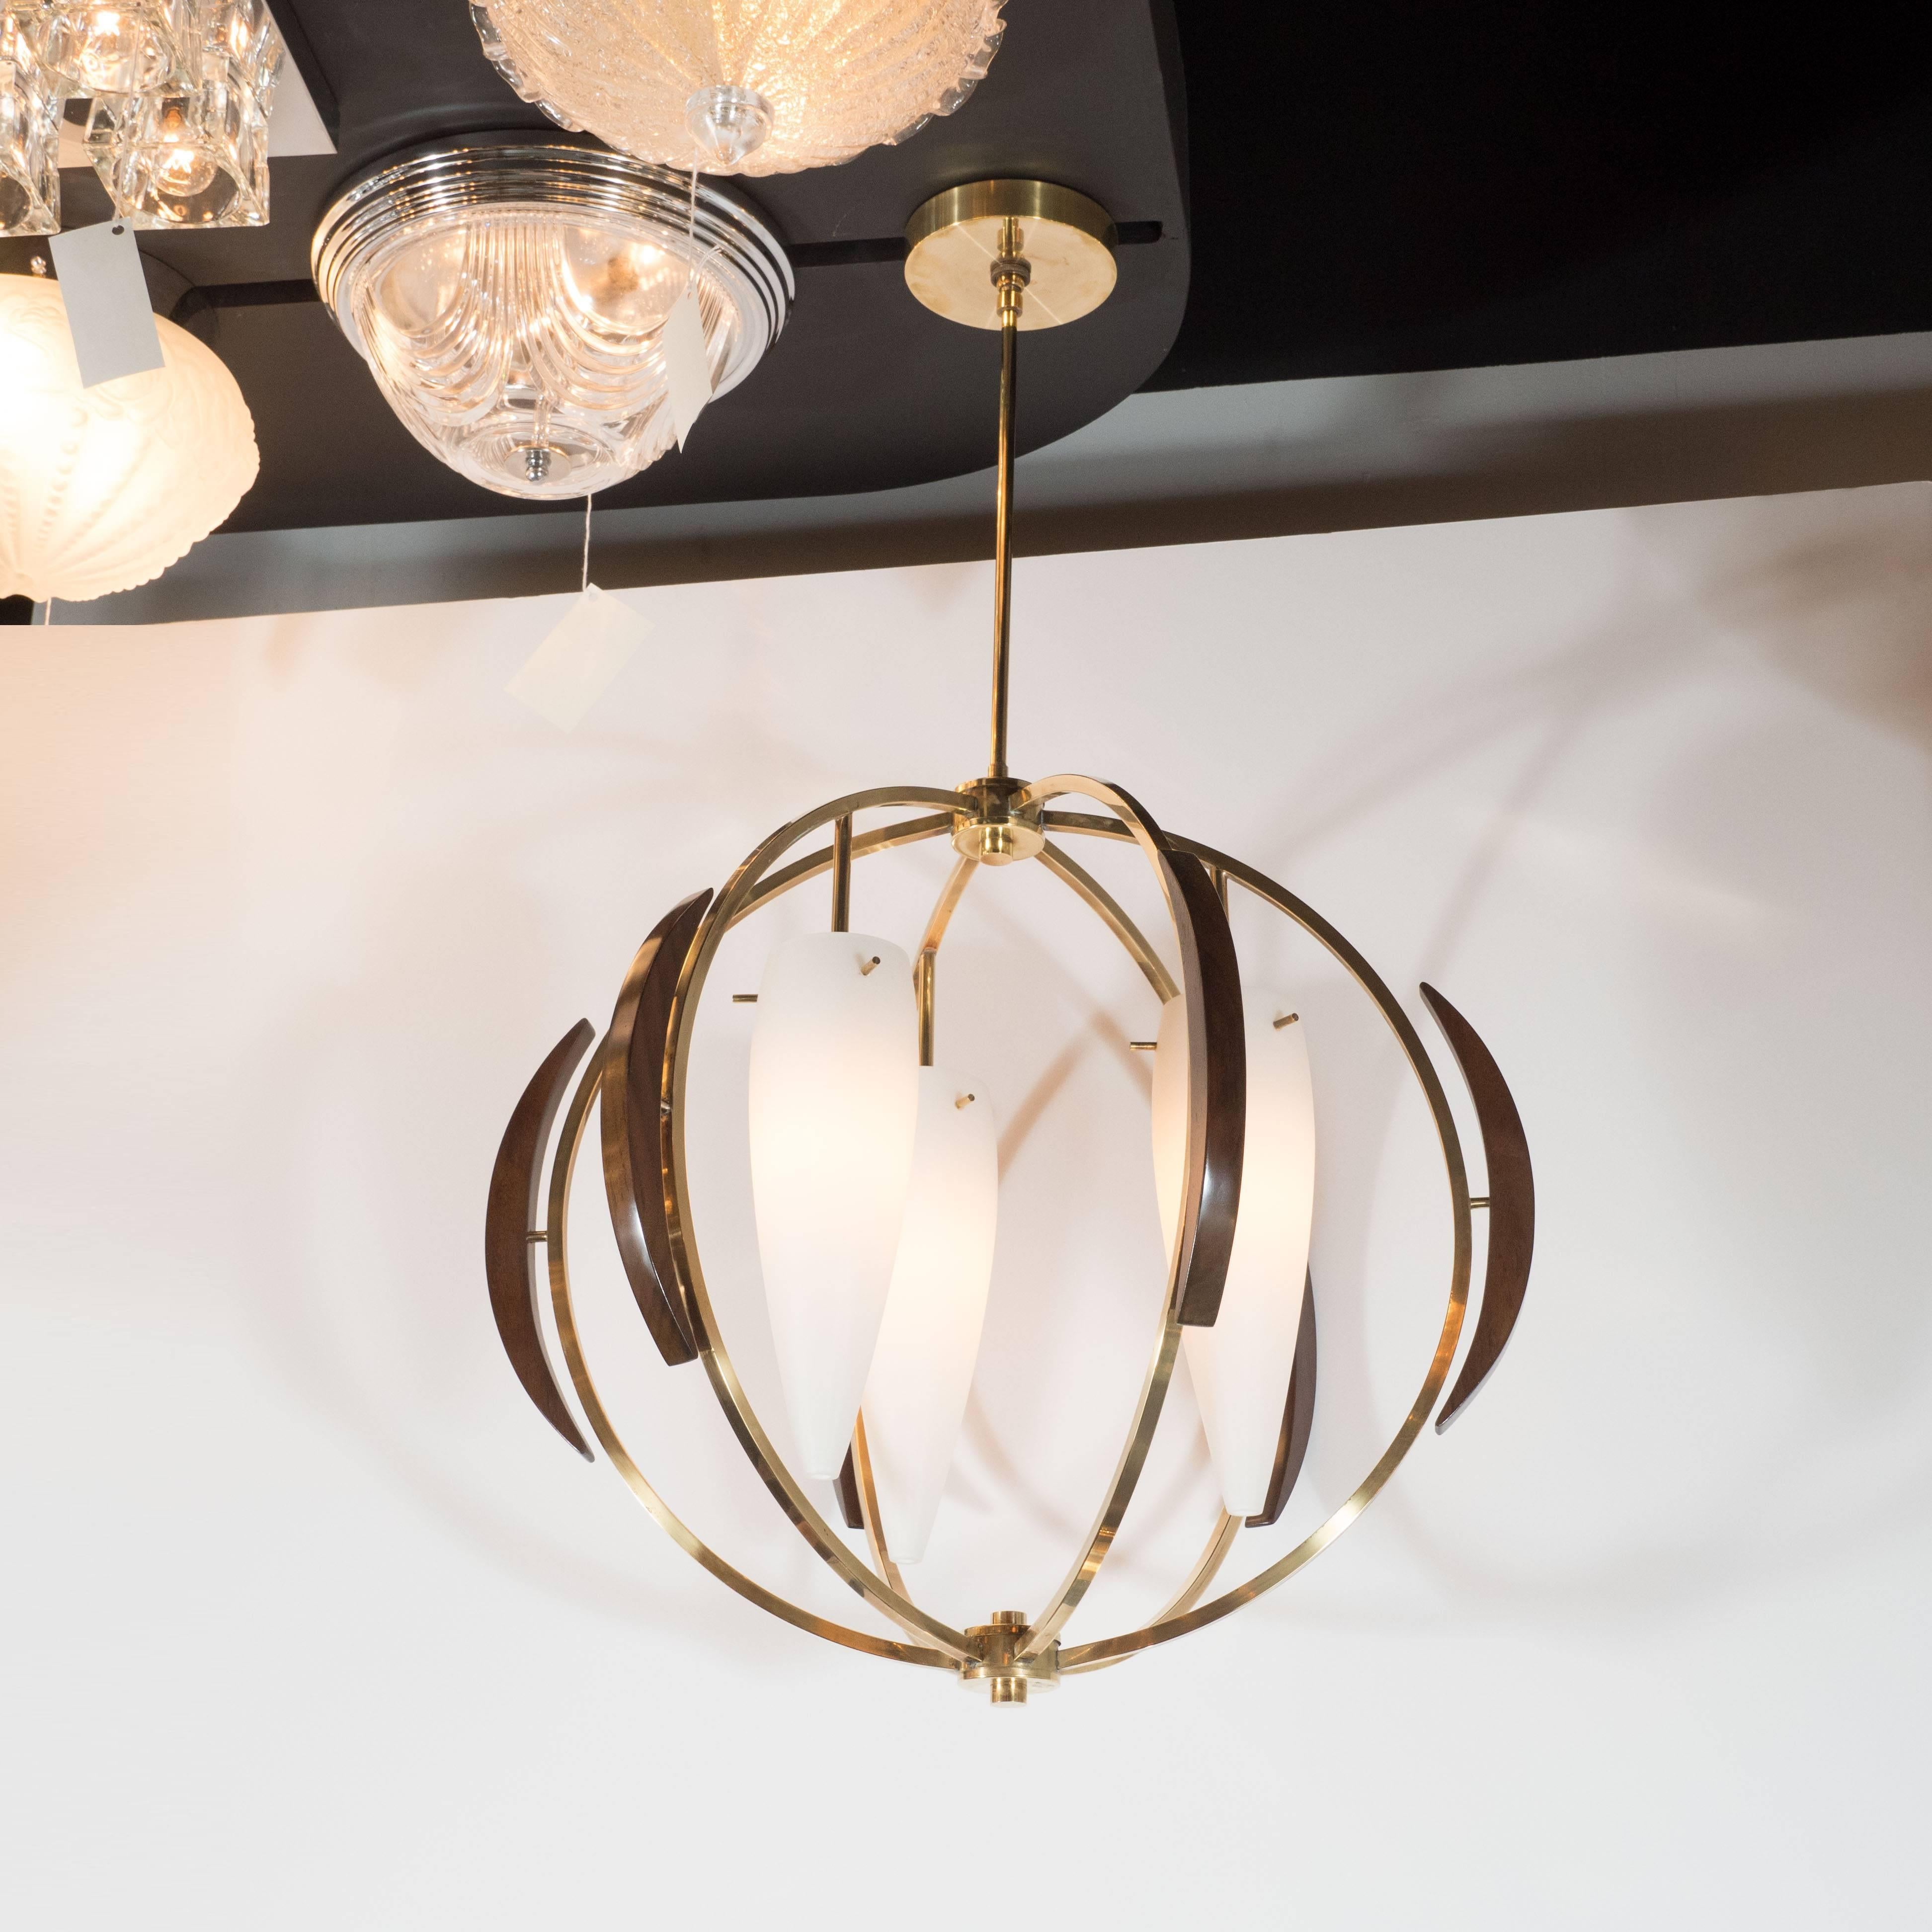 This sophisticated globe form chandelier was realized in France, circa 1950. It features six demilune brass arms, traced on the outside by crested forms in hand rubbed walnut, attached to the ceiling by a brass rod. Gently flared conical frosted